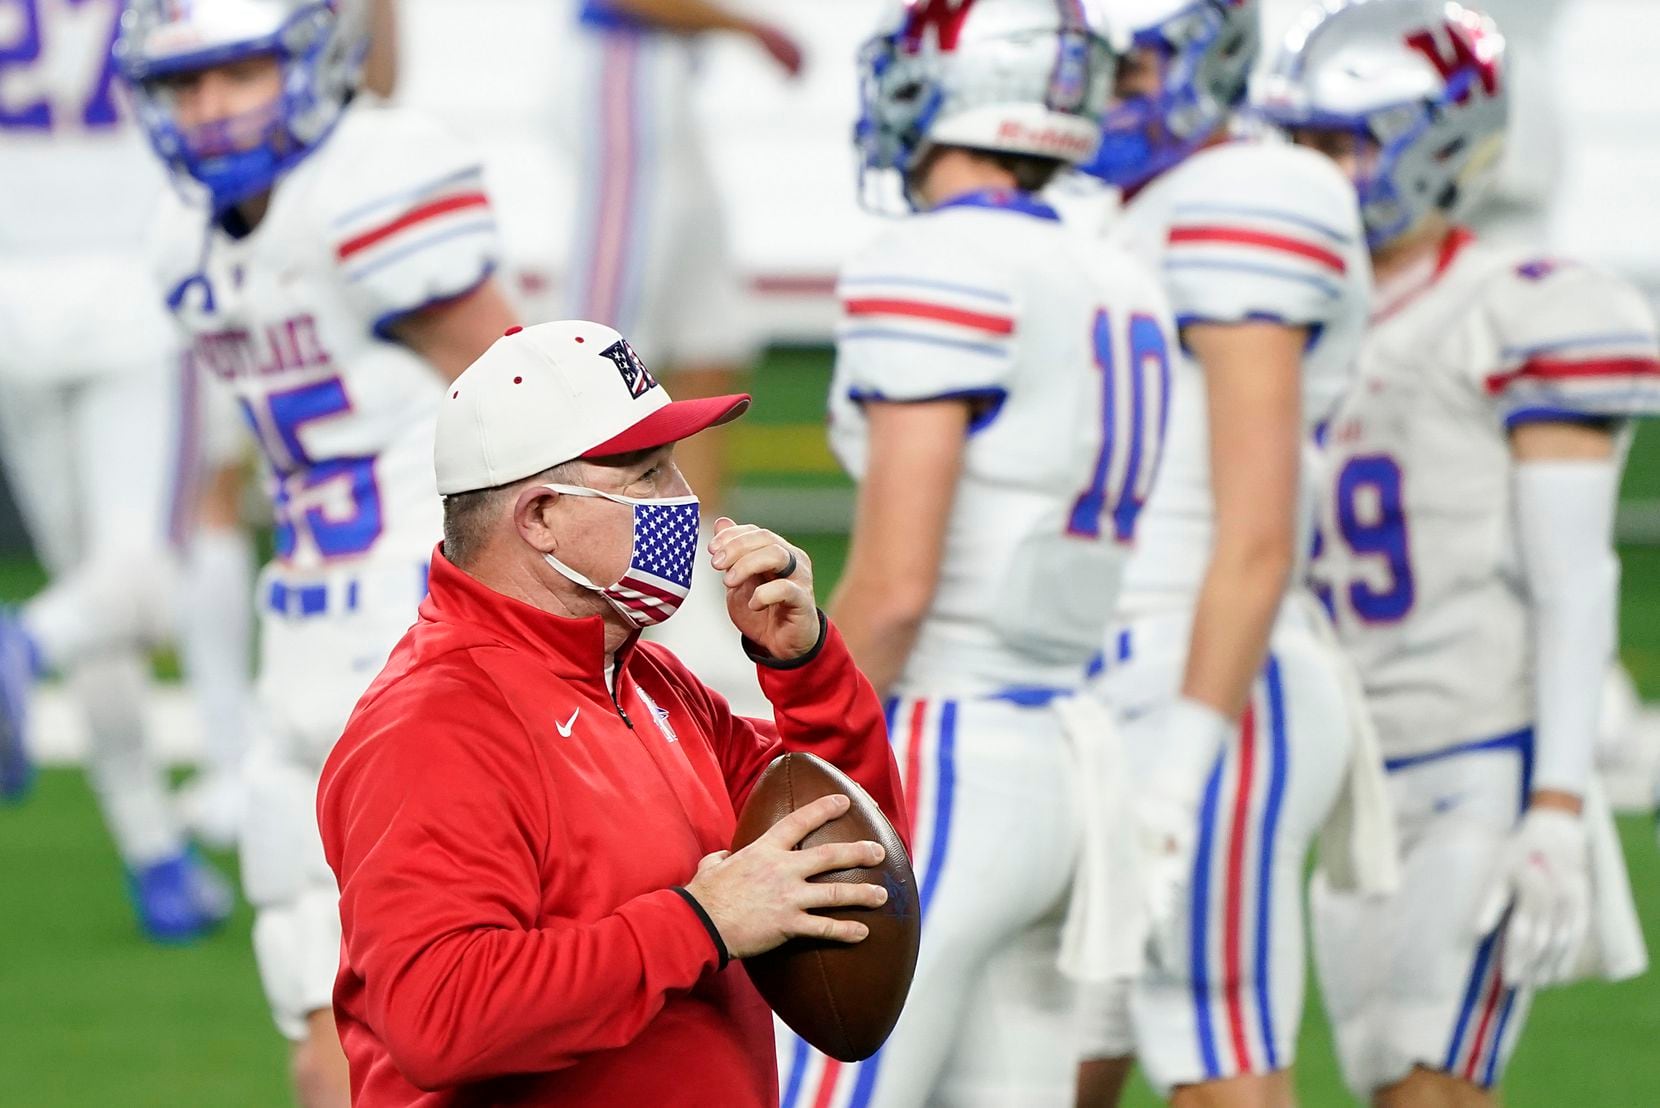 Austin Westlake head coach Todd Dodge watches his team warm up before the Class 6A Division I state football championship game against Southlake Carroll at AT&T Stadium on Saturday, Jan. 16, 2021, in Arlington, Texas.